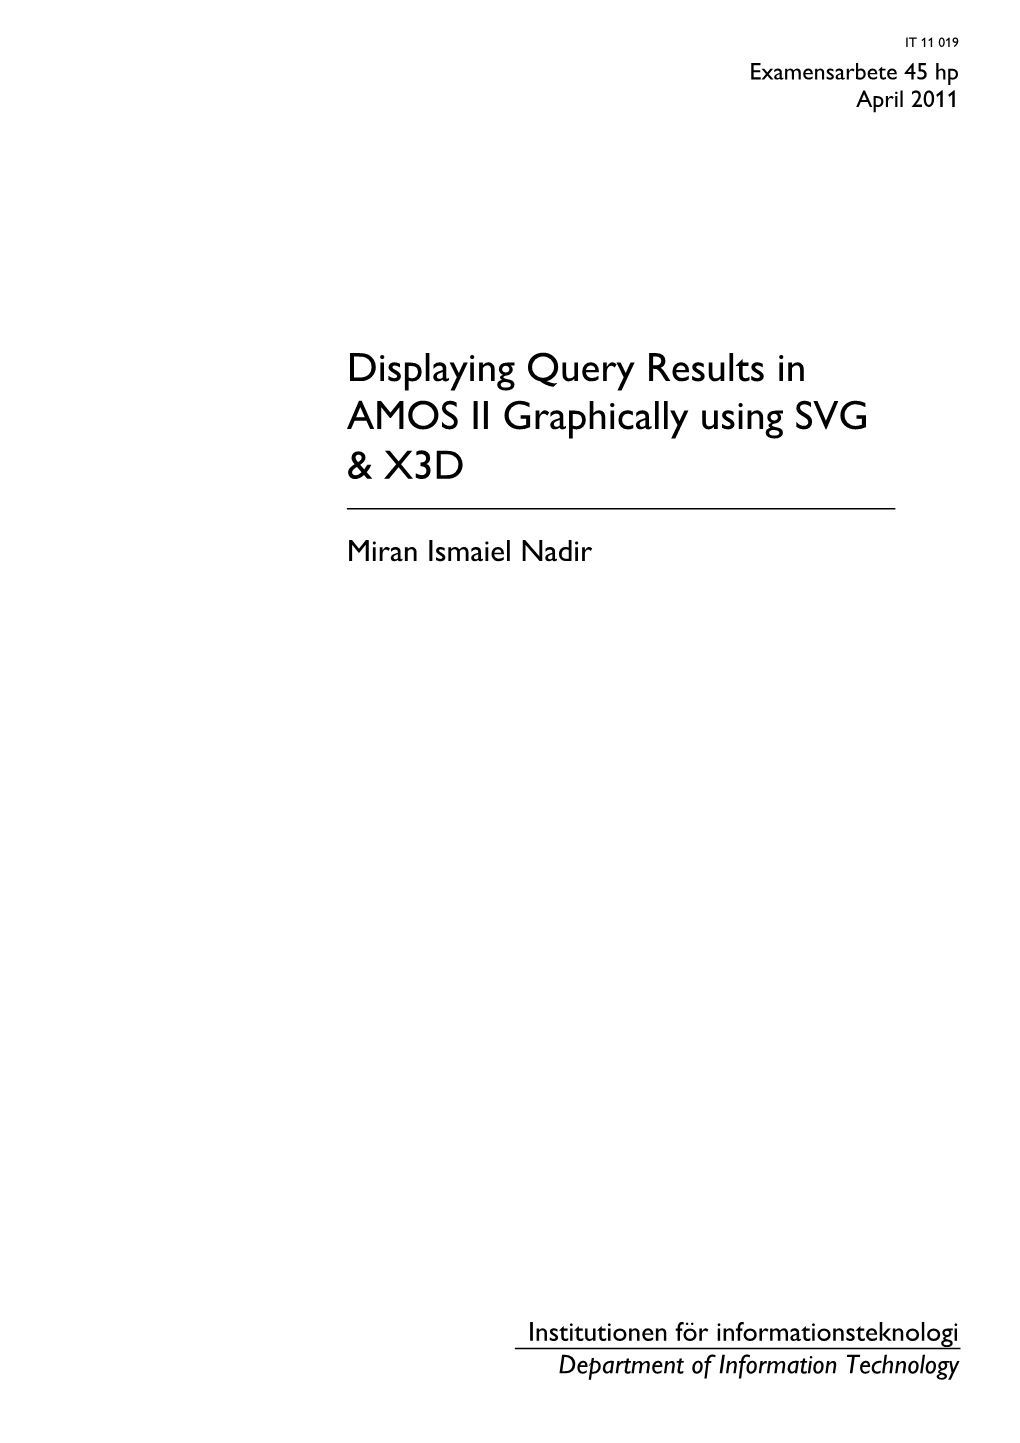 Displaying Query Results in AMOS II Graphically Using SVG &